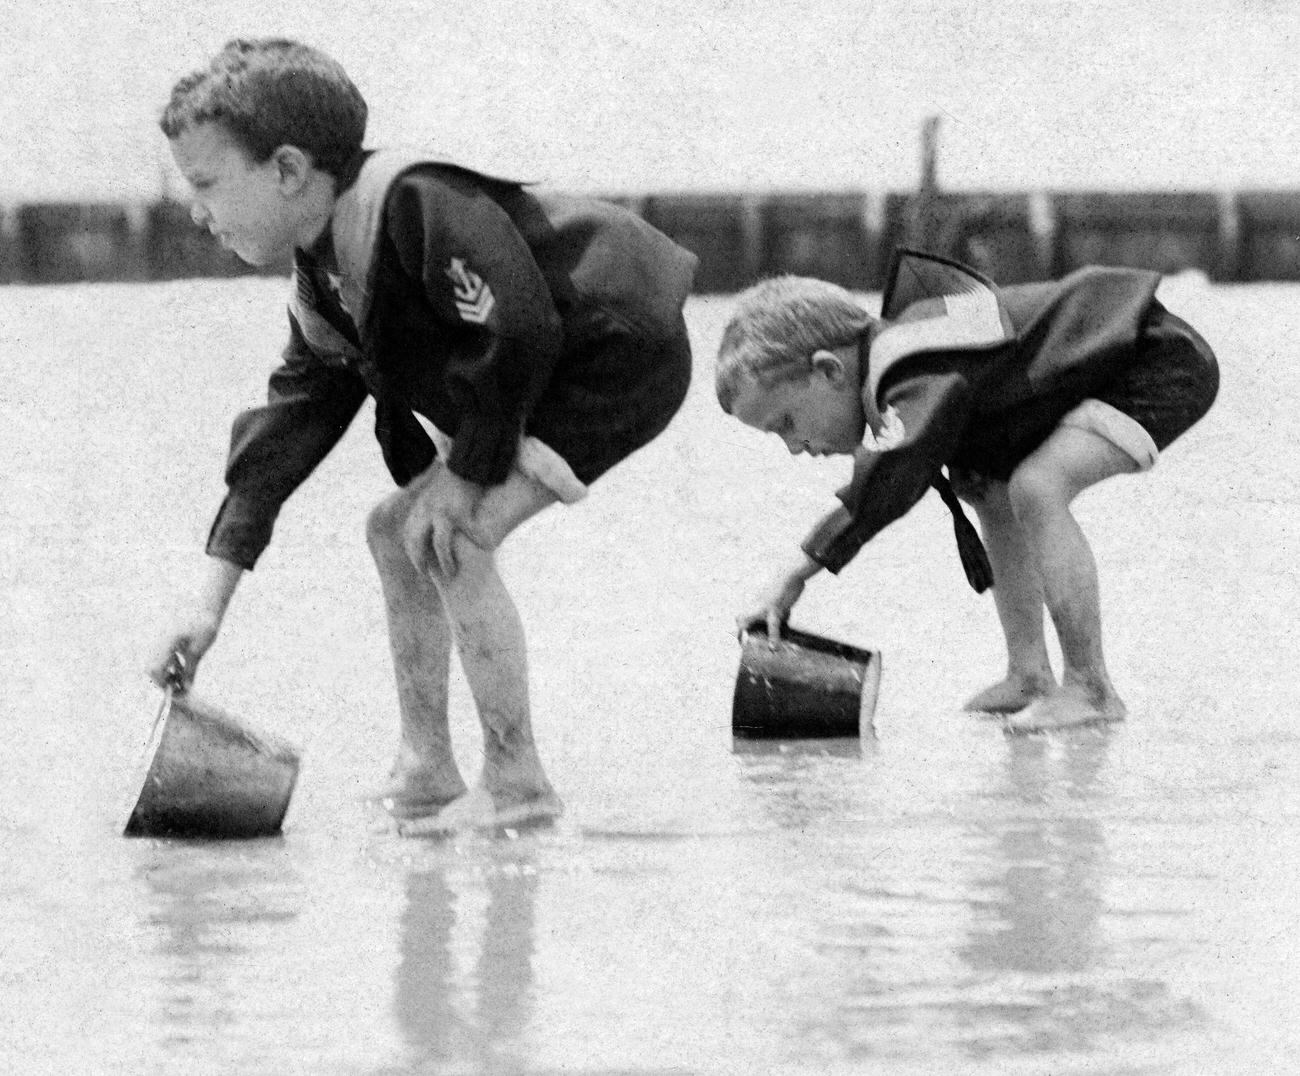 Boys Playing In The Water At The Beach, 1904